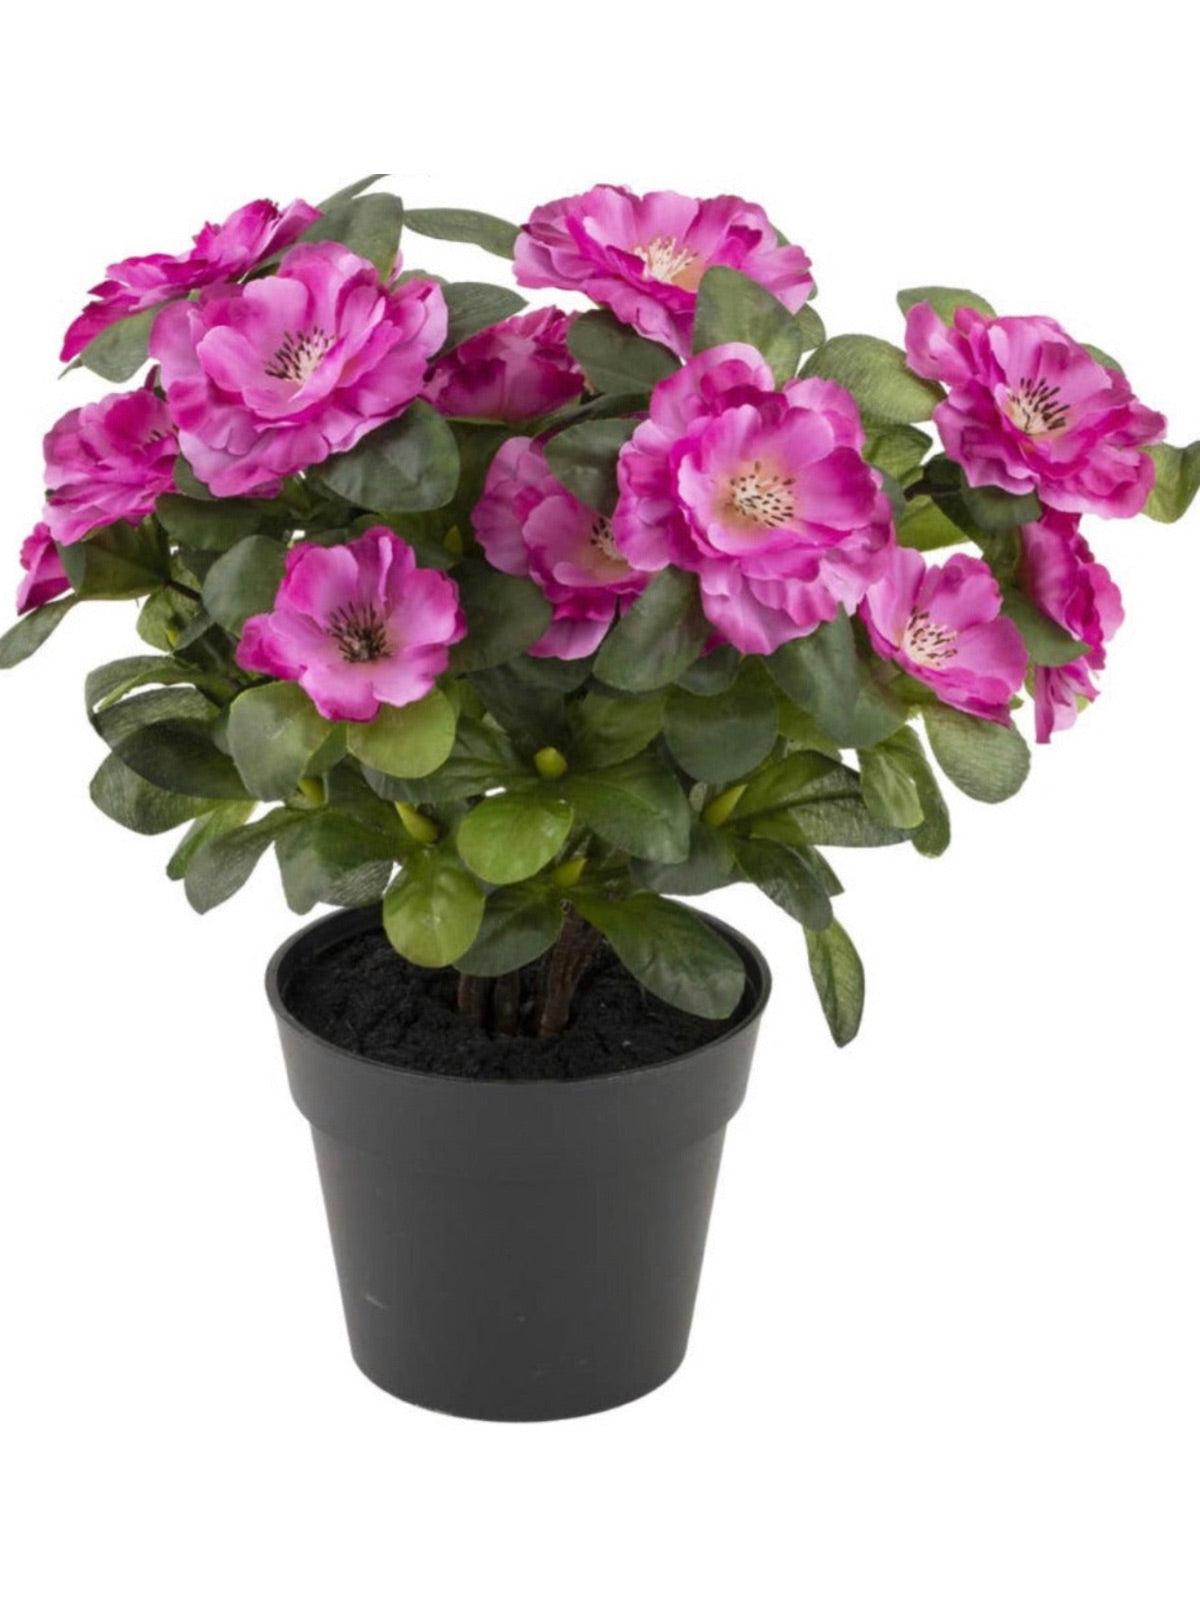 Beauty Belgium Azalea Faux Plant. Home Decoration items are the best way to ensure that you can inject your personality into your home and make everything look like a reflection of who you are.